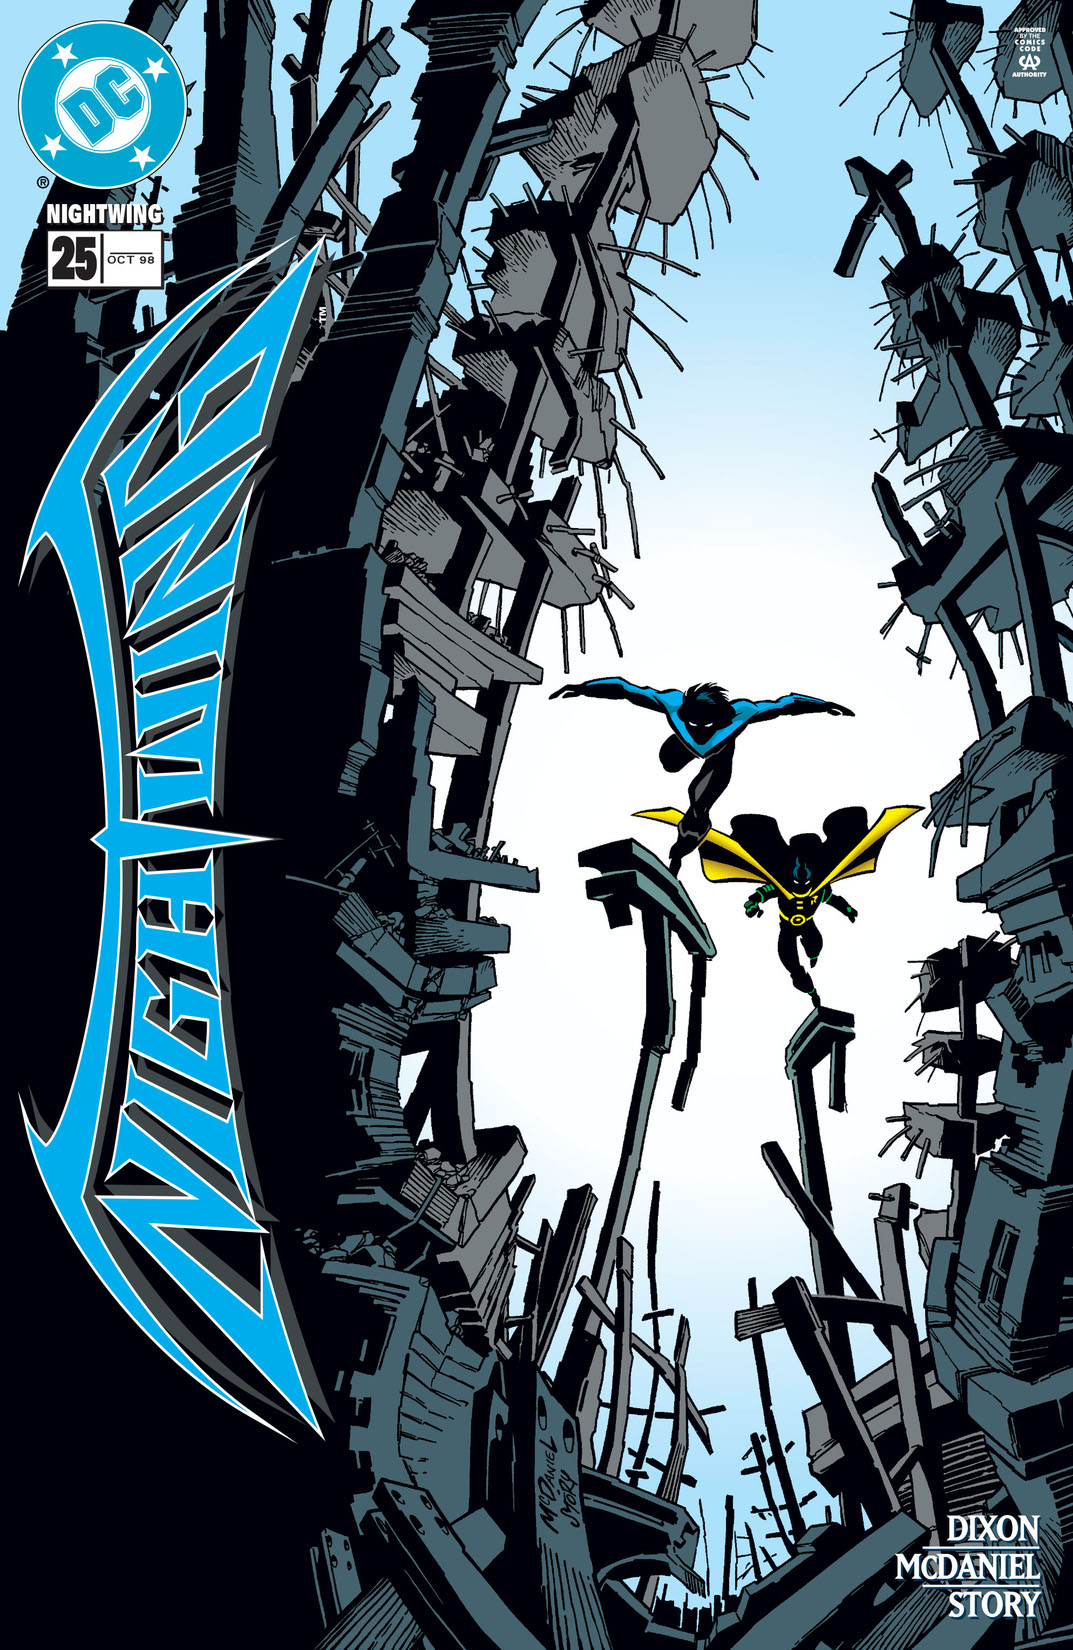 Nightwing (1996-) #25 preview images